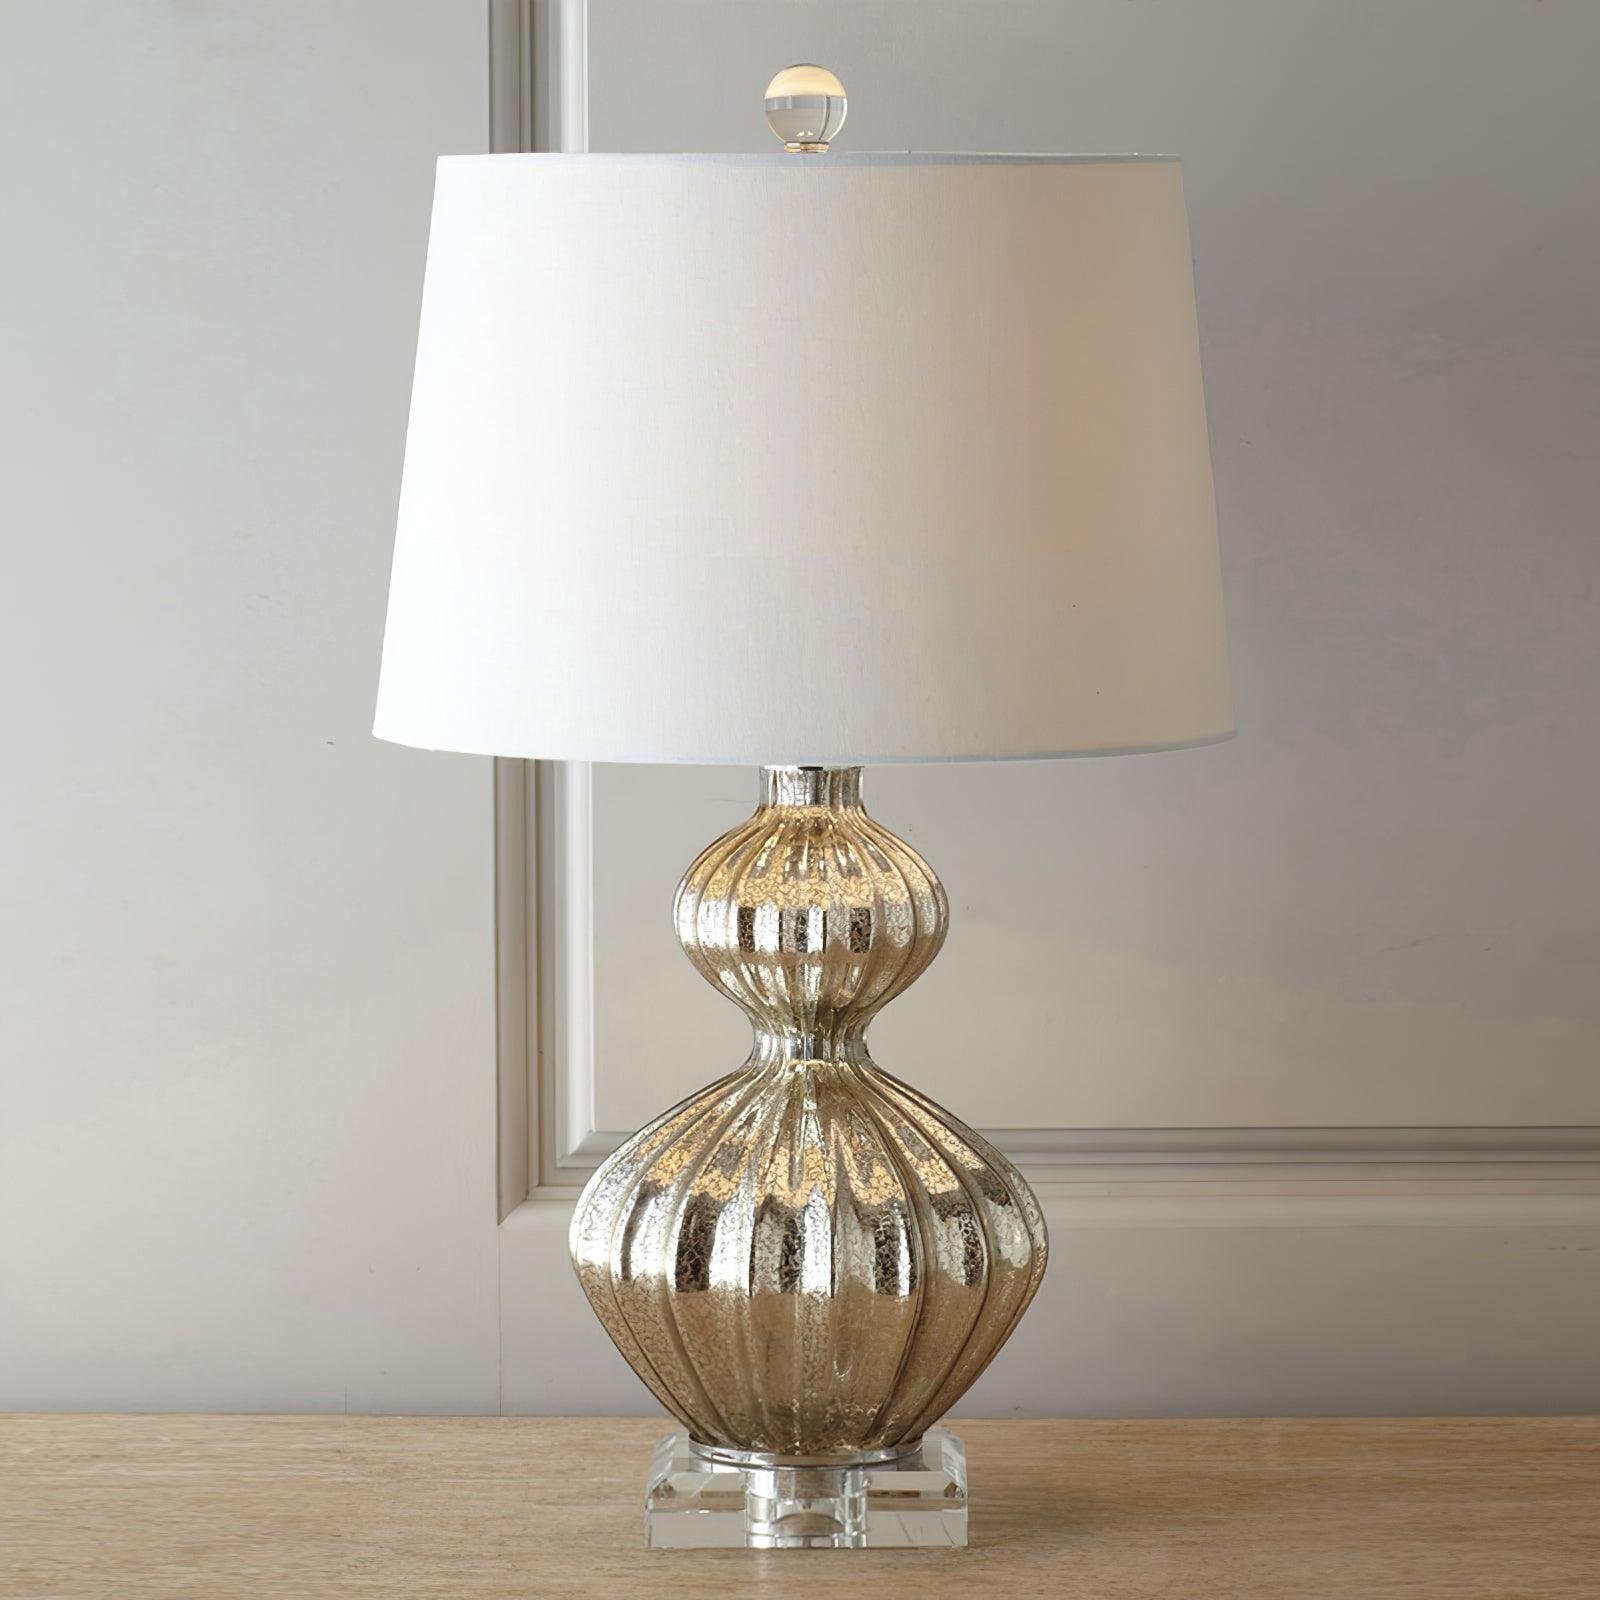 Silver+Linen Cottage Table Lamp with UK plug, Diameter 13.7" x Height 22.8" (35cm x 58cm)